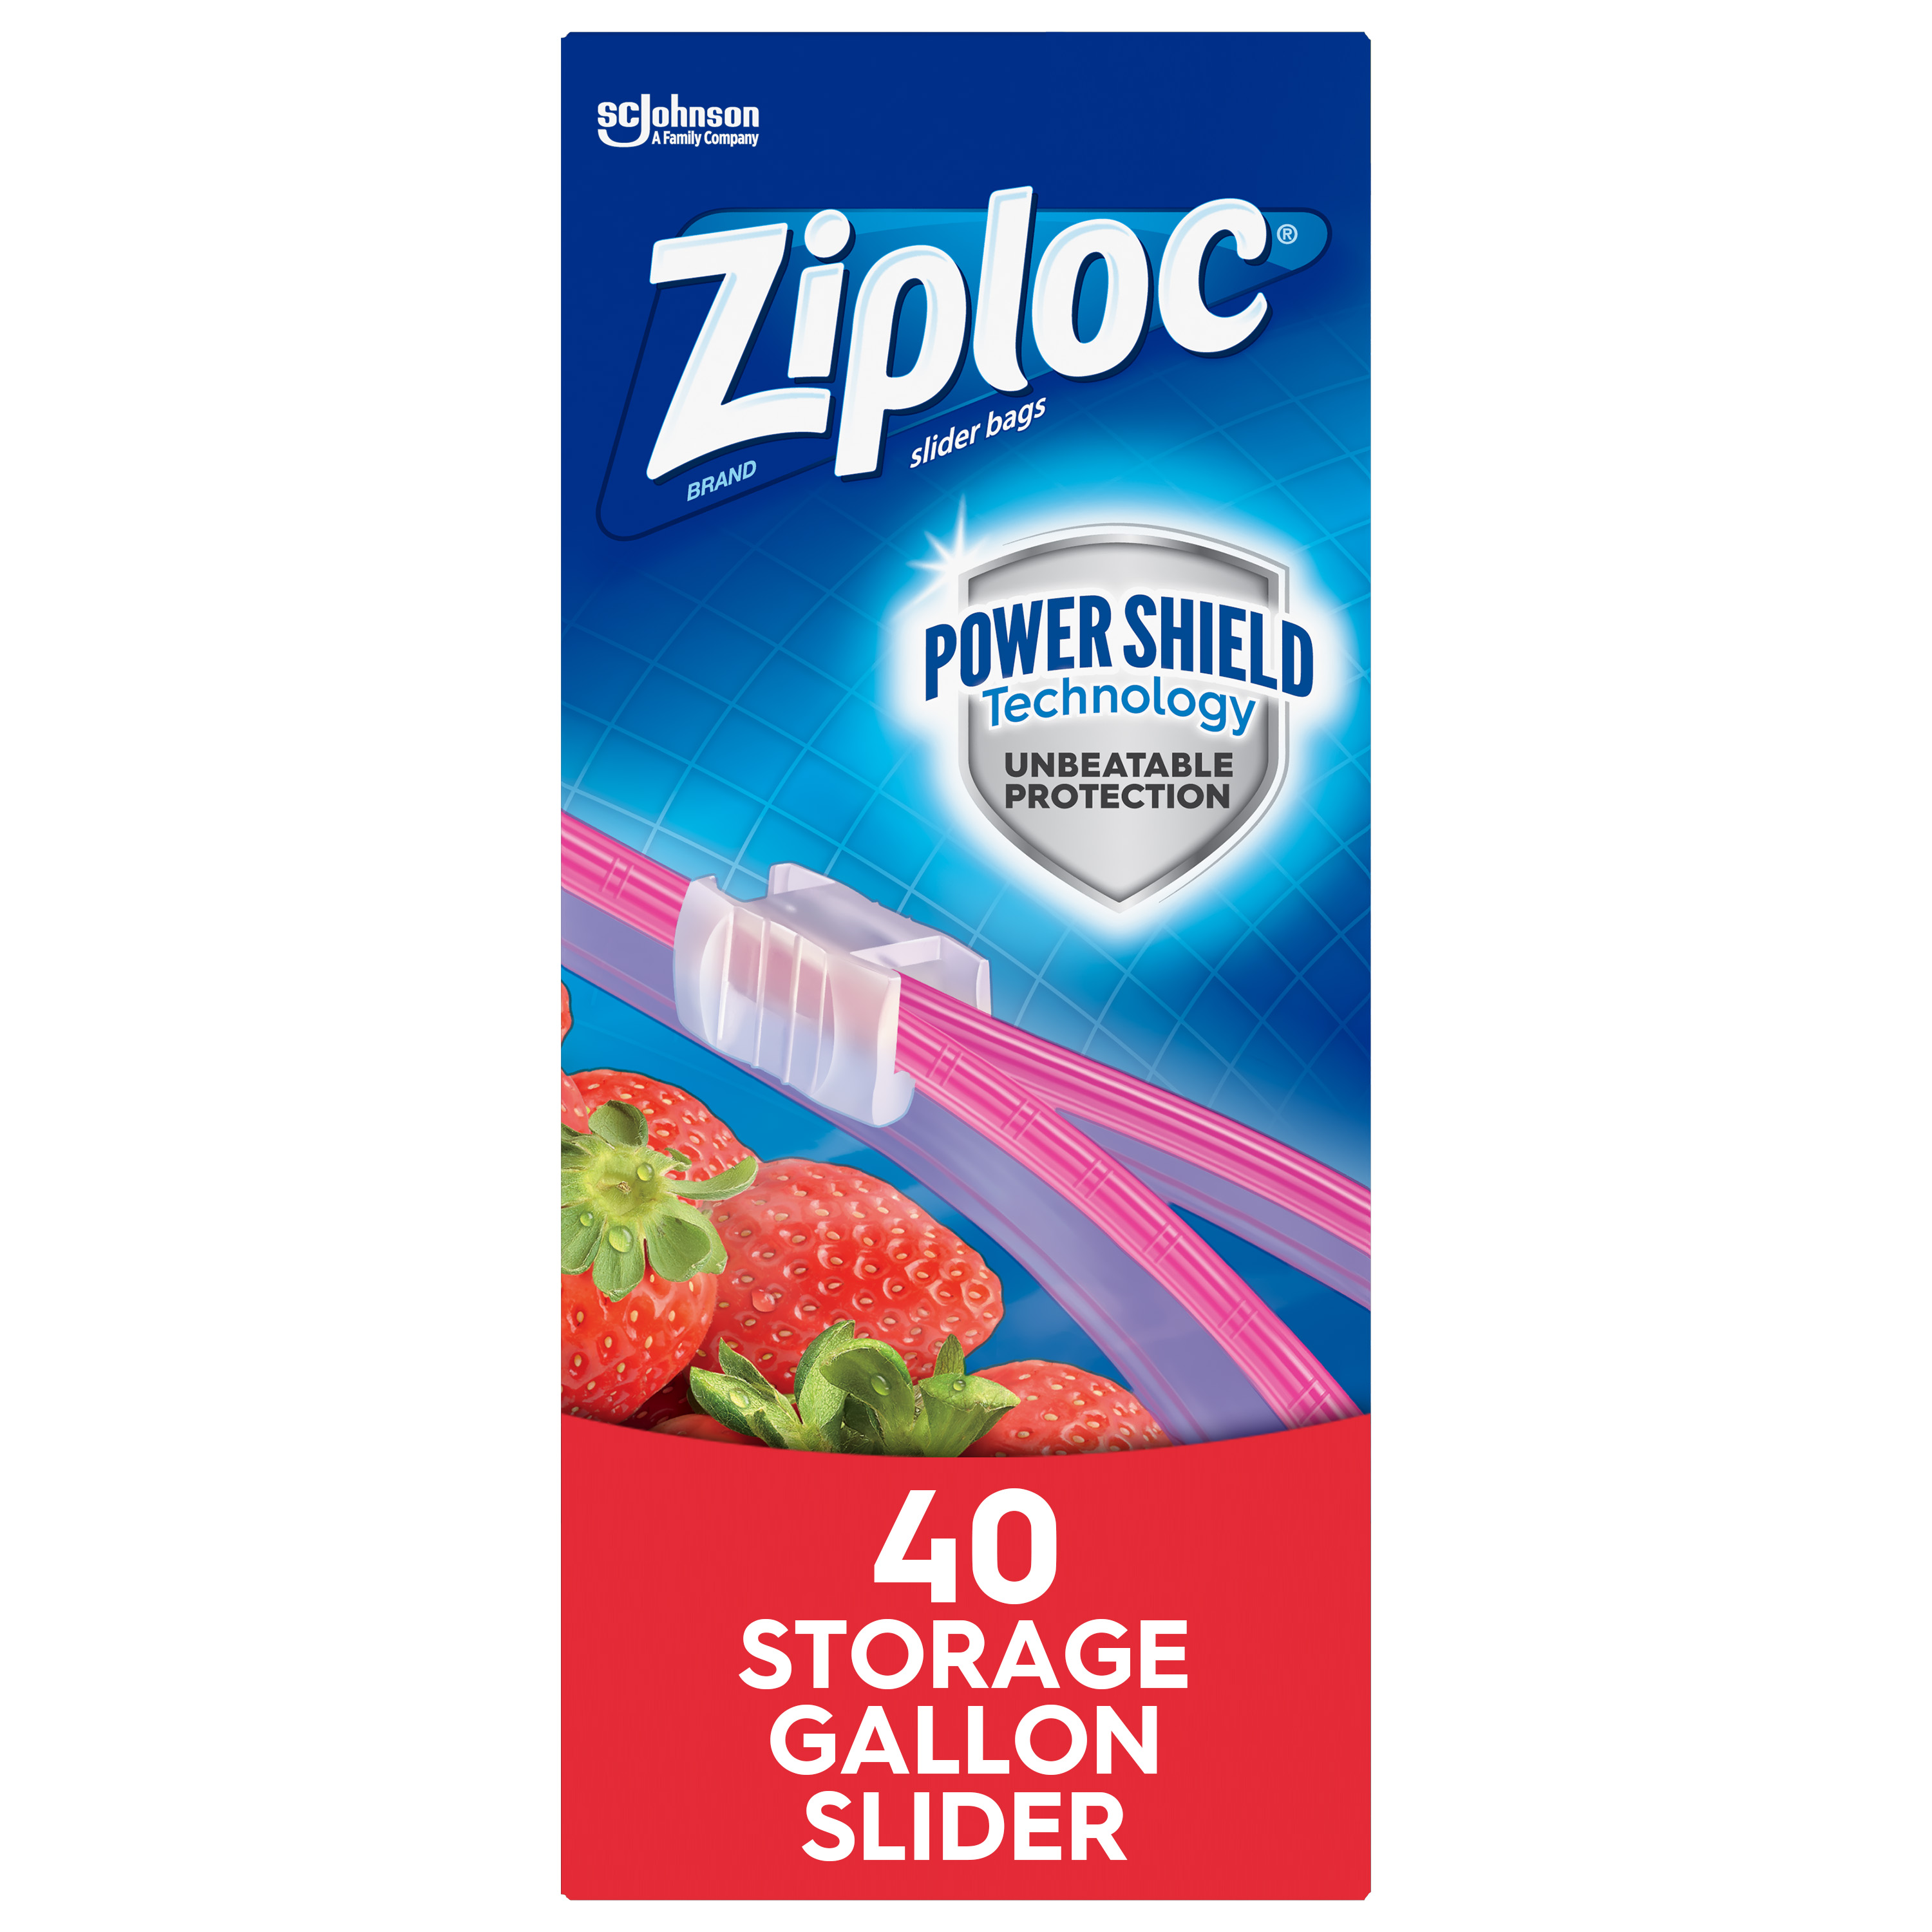 Ziploc Brand Slider Storage Gallon Bags with Power Shield Technology, 40 Count - image 1 of 11